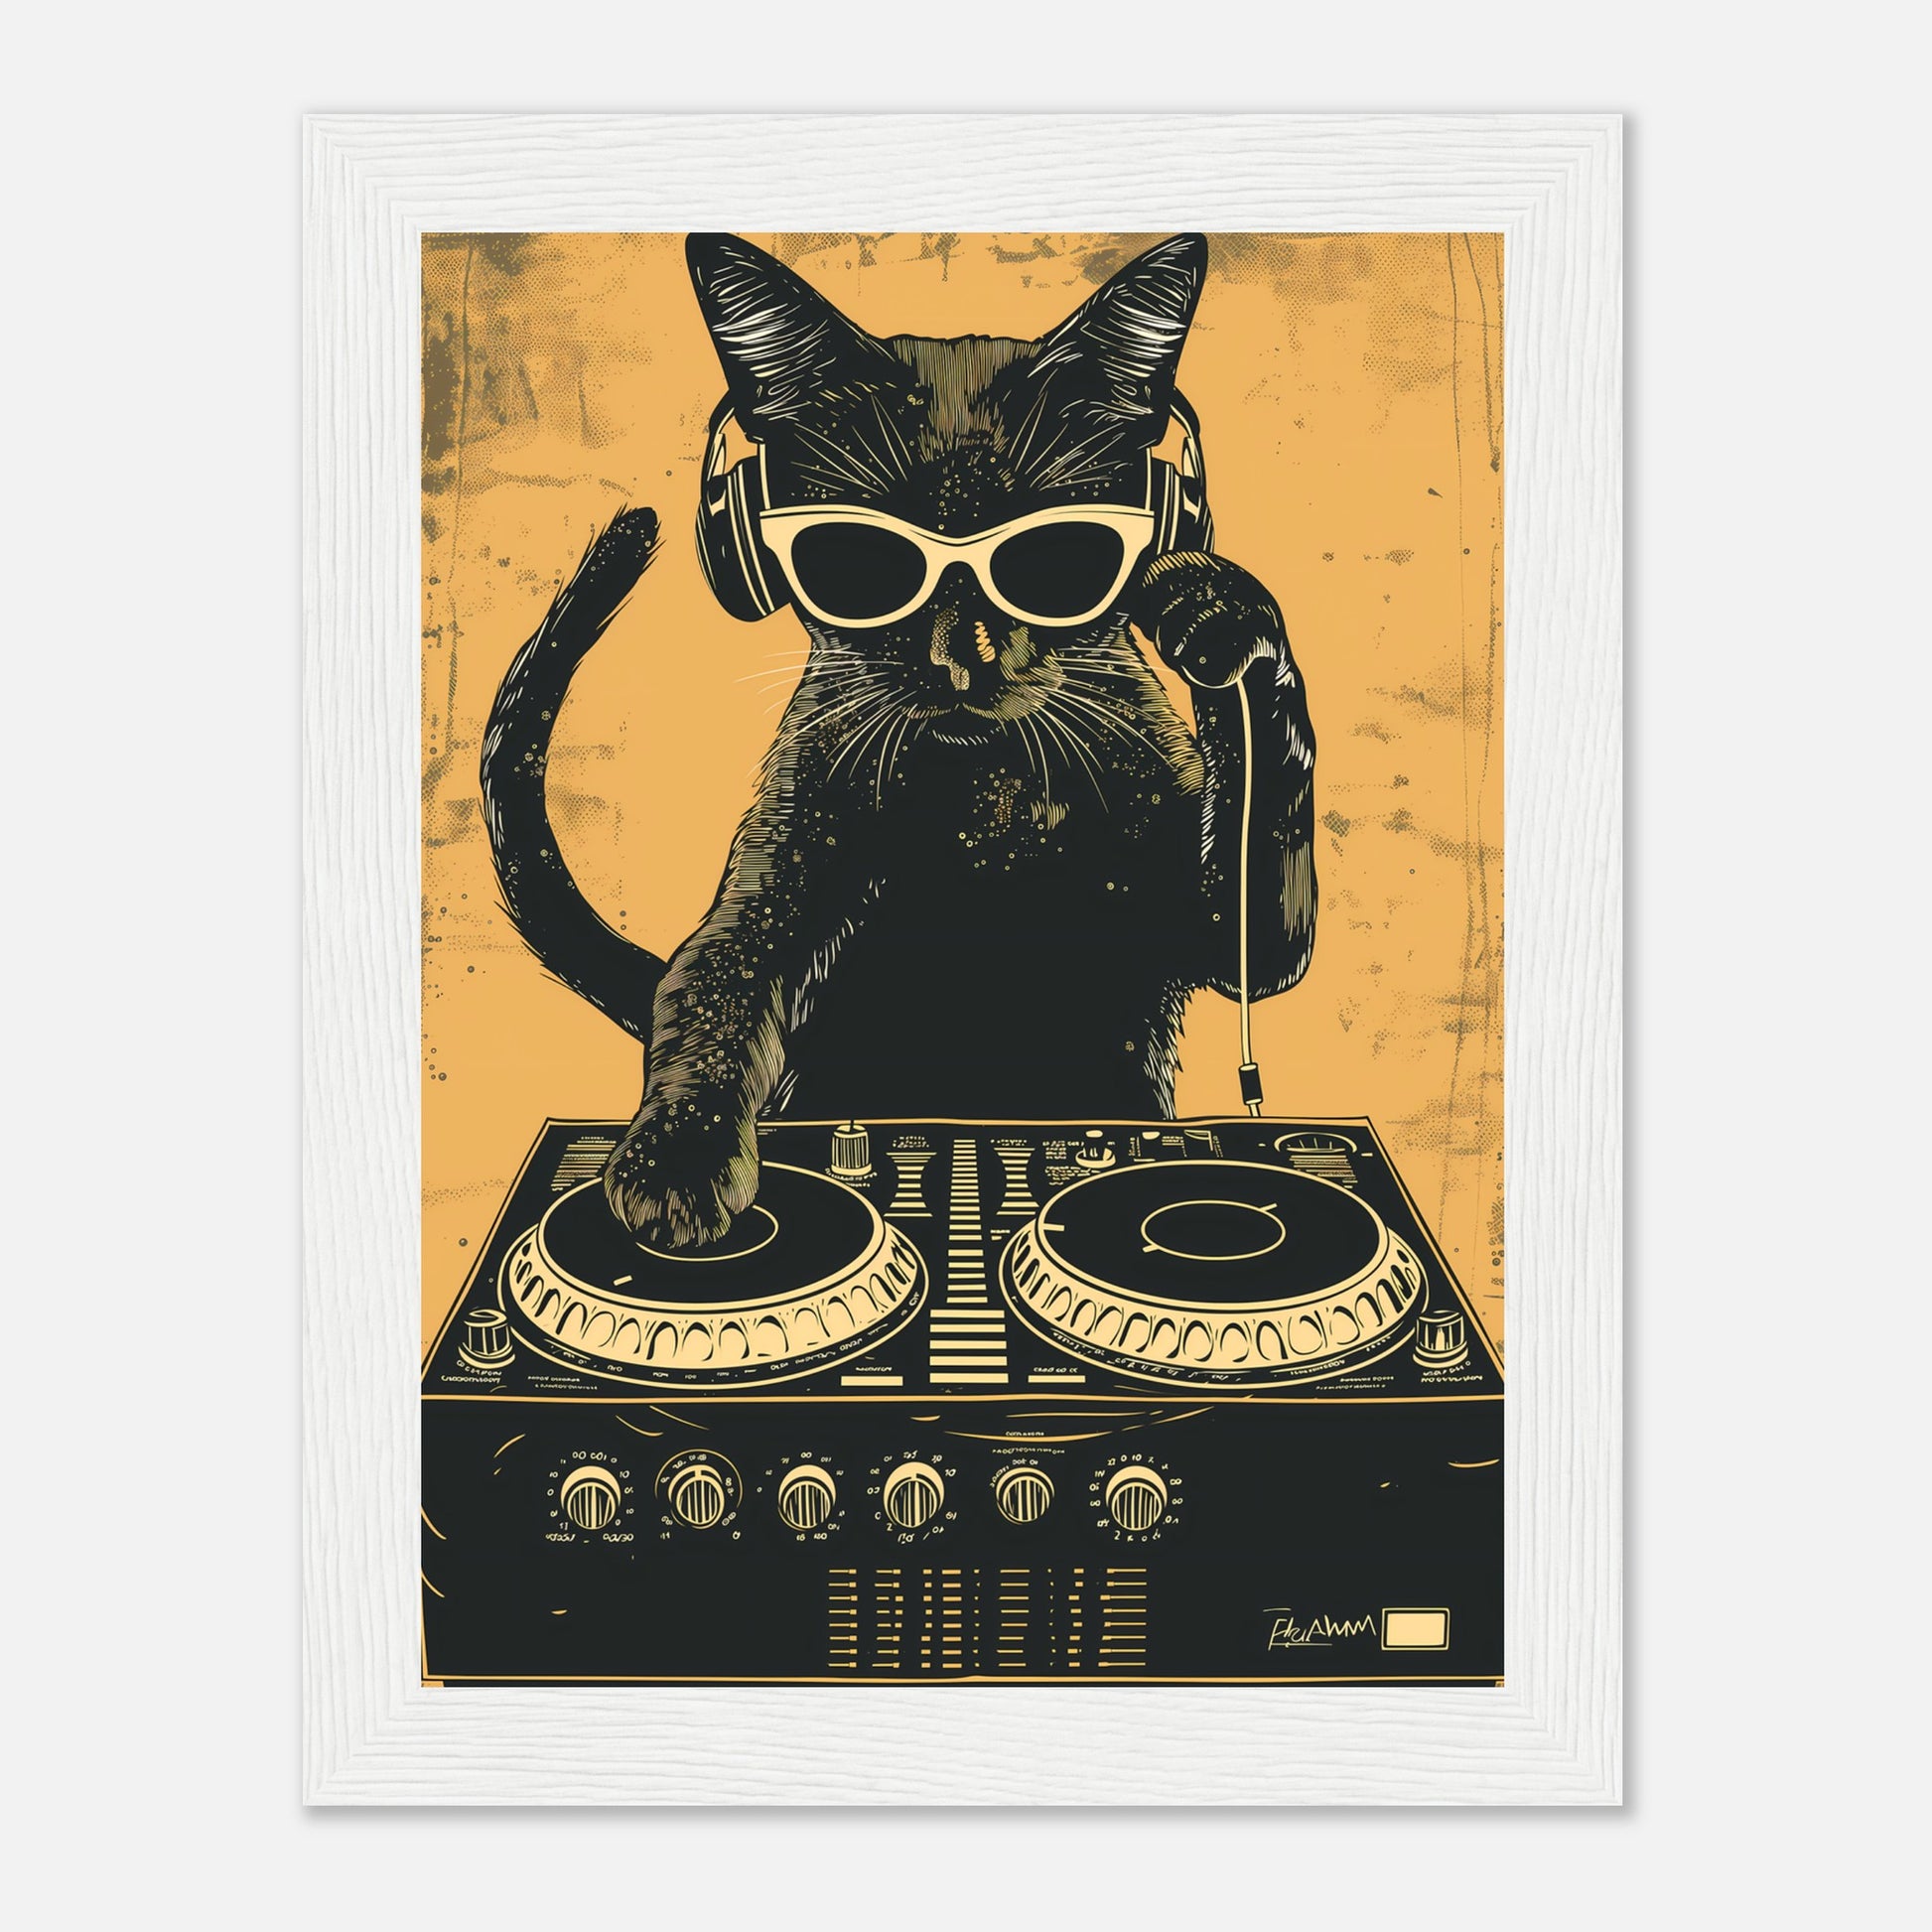 A stylized illustration of a cat with sunglasses DJing on turntables.